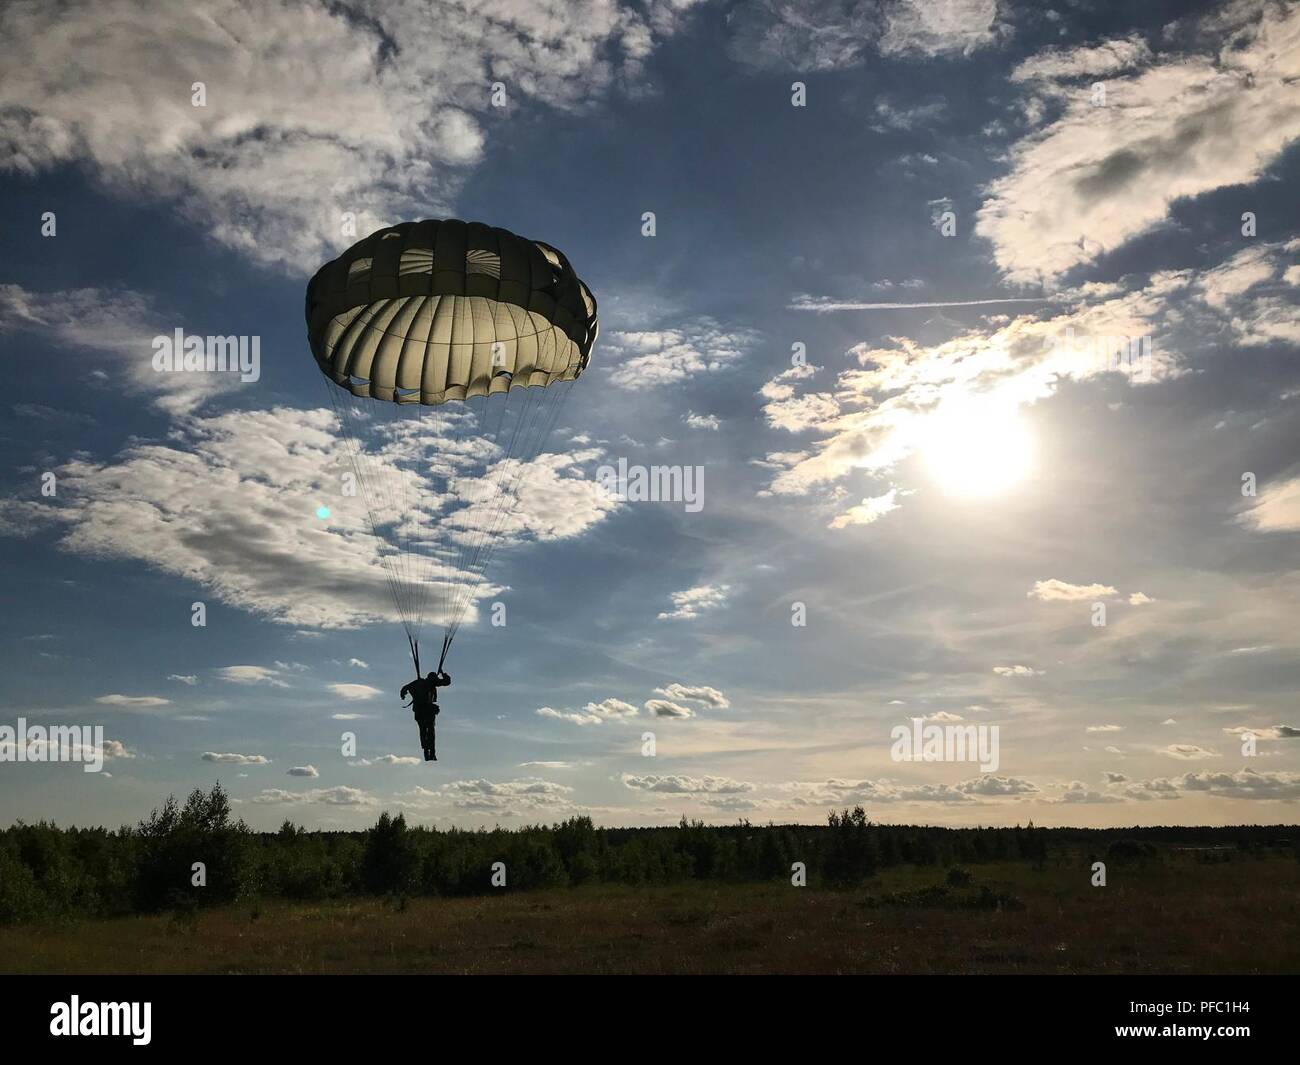 A Lithuanian National Defence Volunteer Force soldiers glides to the ground with members of the Pennsylvania Army National Guard during airborne training at the annual Saber Strike exercise near Rukla, Lithuania, June 7, 2018. This year marks the 25th anniversary of working relations between Lithuania and the state of Pennsylvania as part of a state partnership program. Saber Strike is a multinational exercise scheduled to run from June 3-15 that tests participants from 19 countries on interoperability and each unit's ability to perform its assigned tasks. Stock Photo